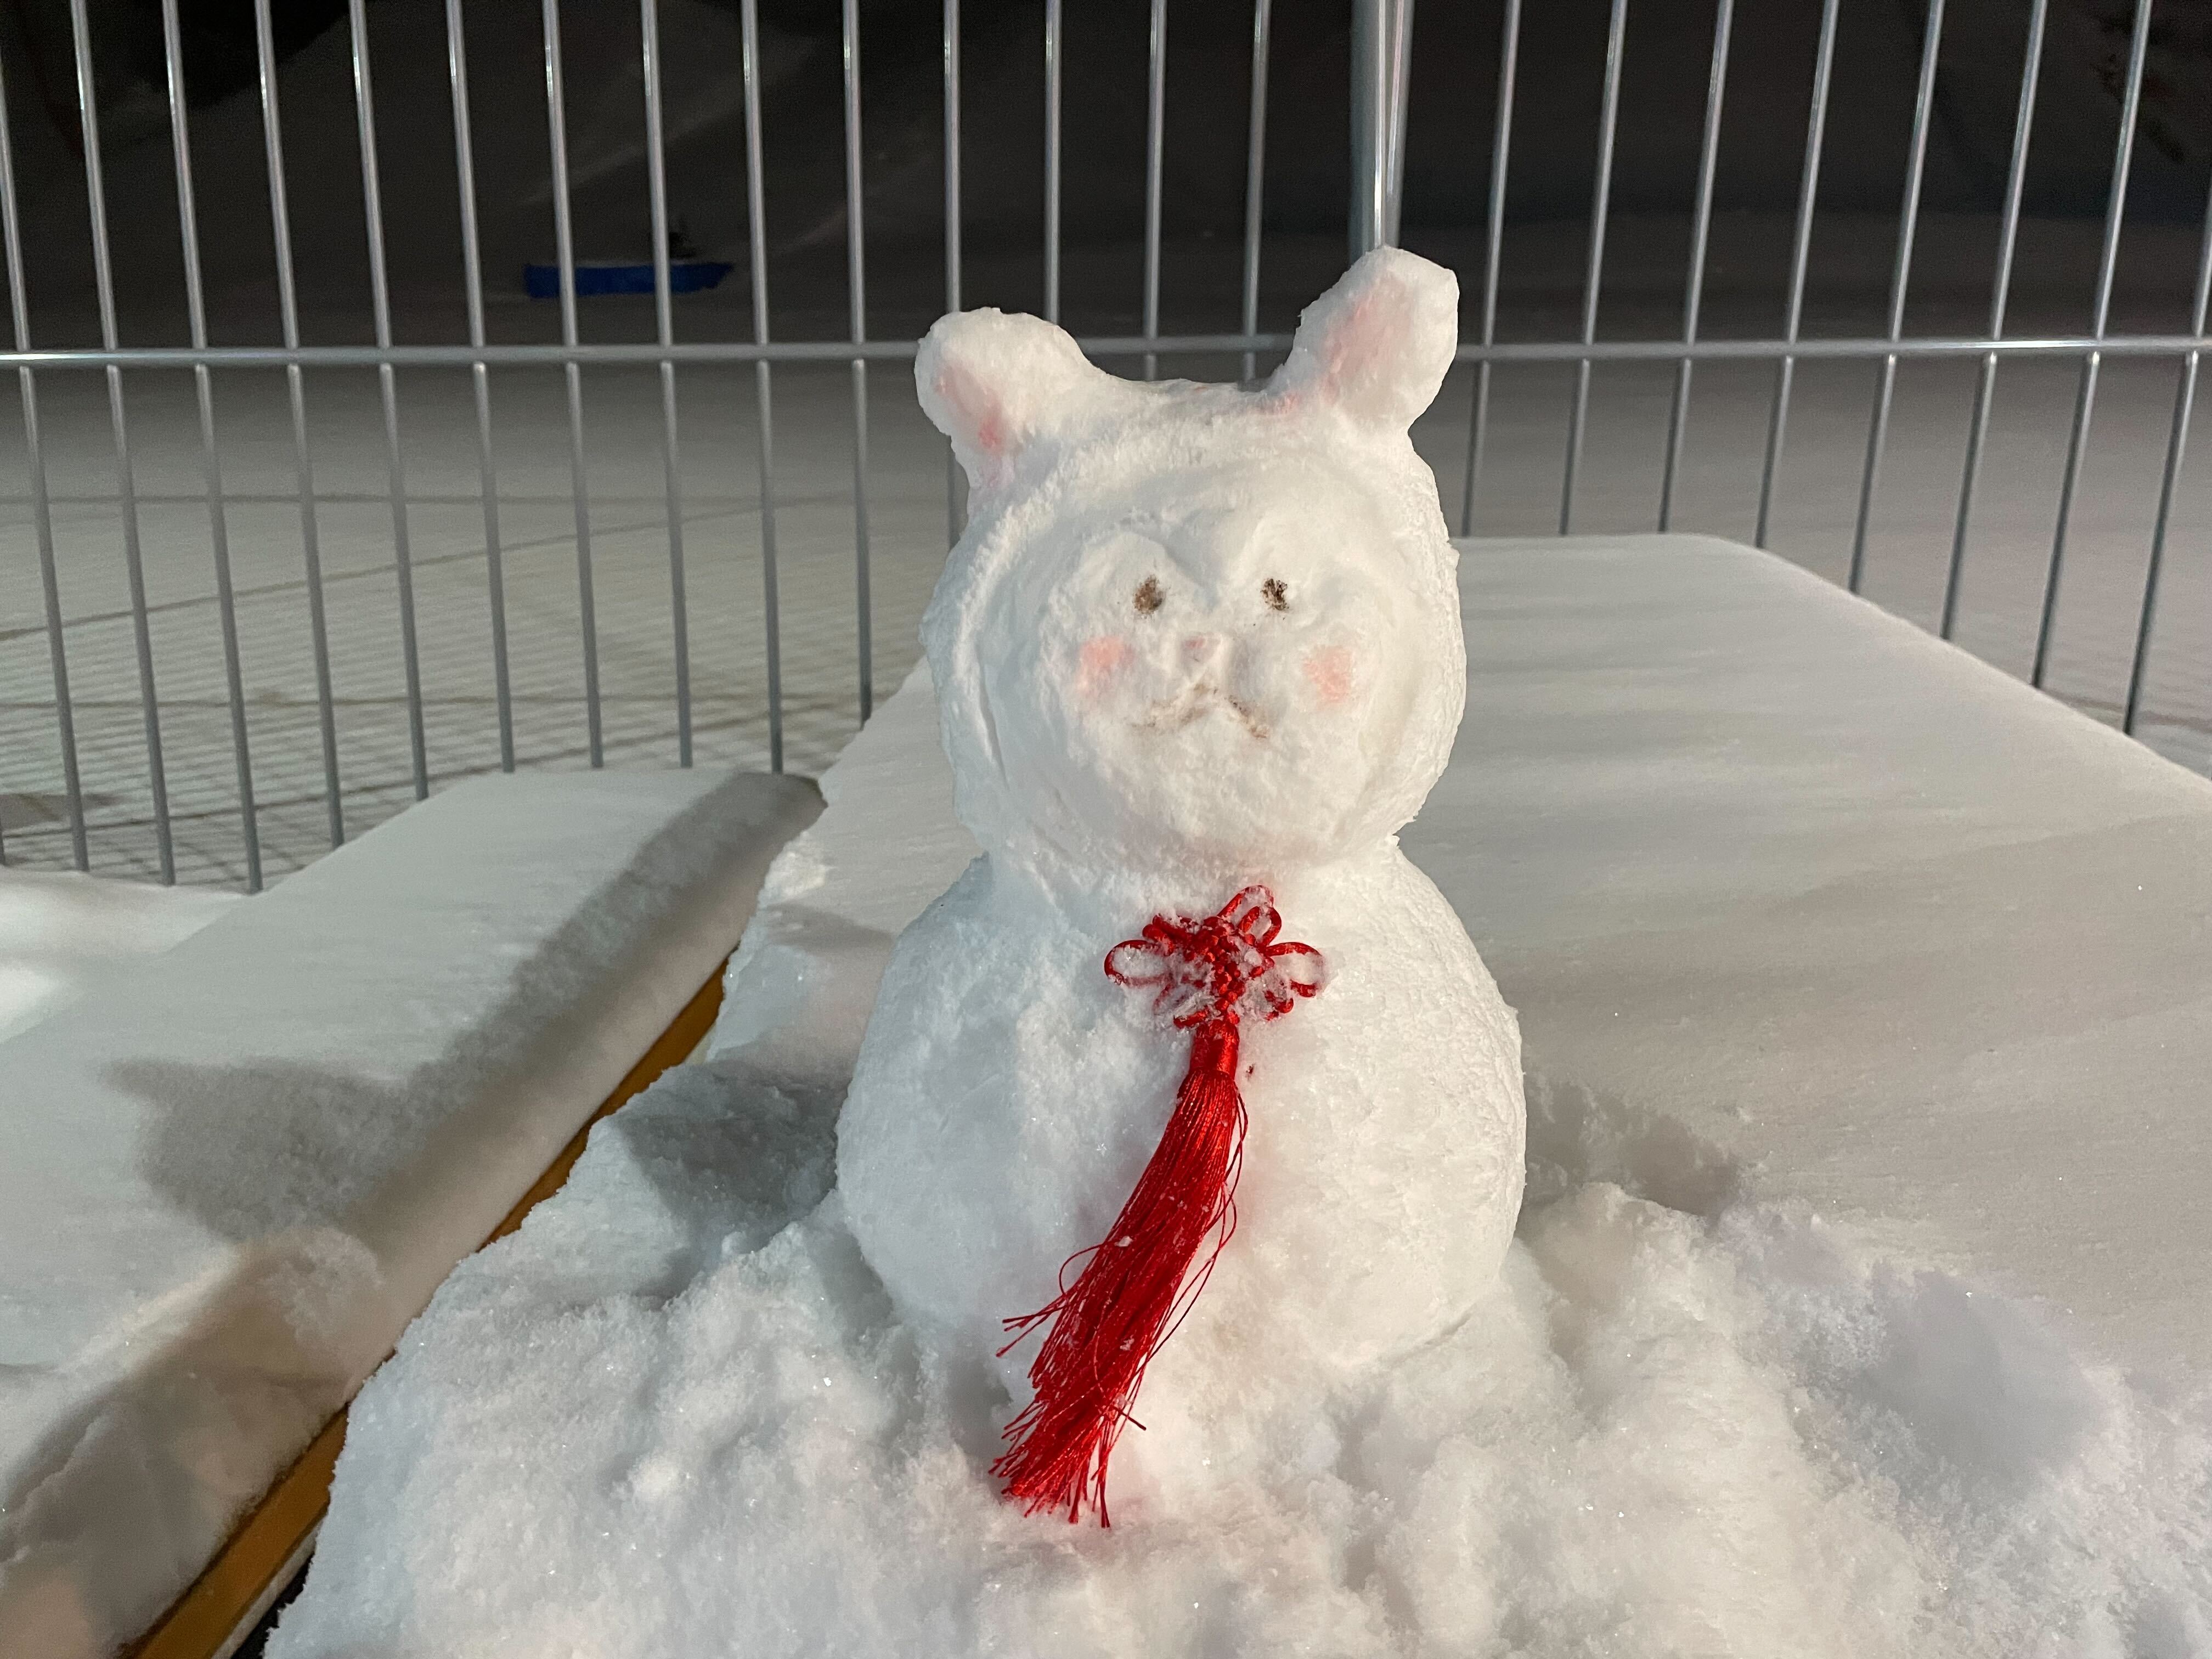 A cute snow creature made by a worker at the Genting Grand Secret Garden, home to the Zhangjiakou mountain press center.